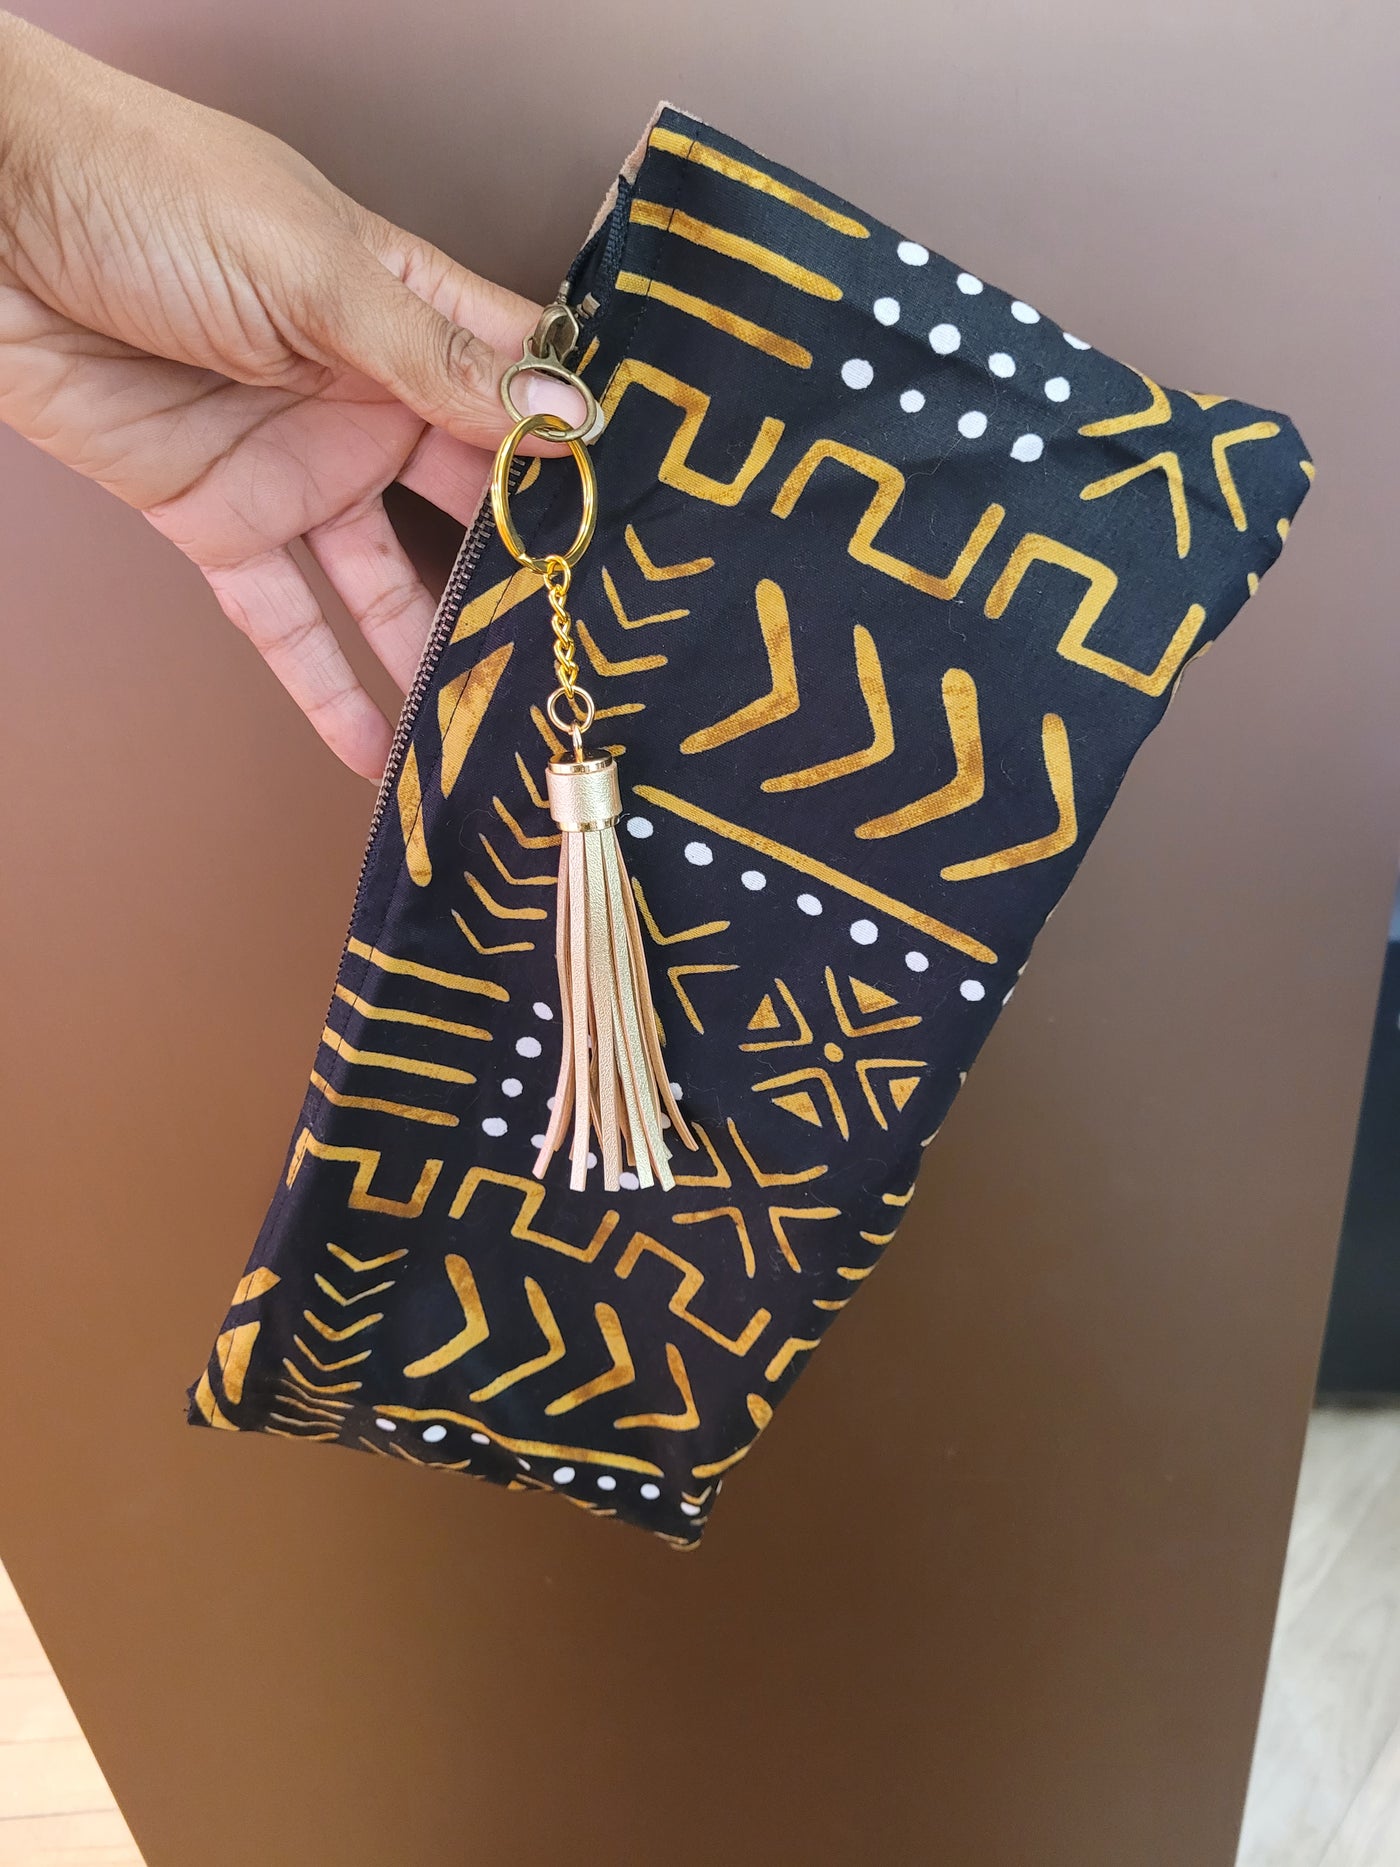 "FOREVER" Mudcloth Clutch with Tassel